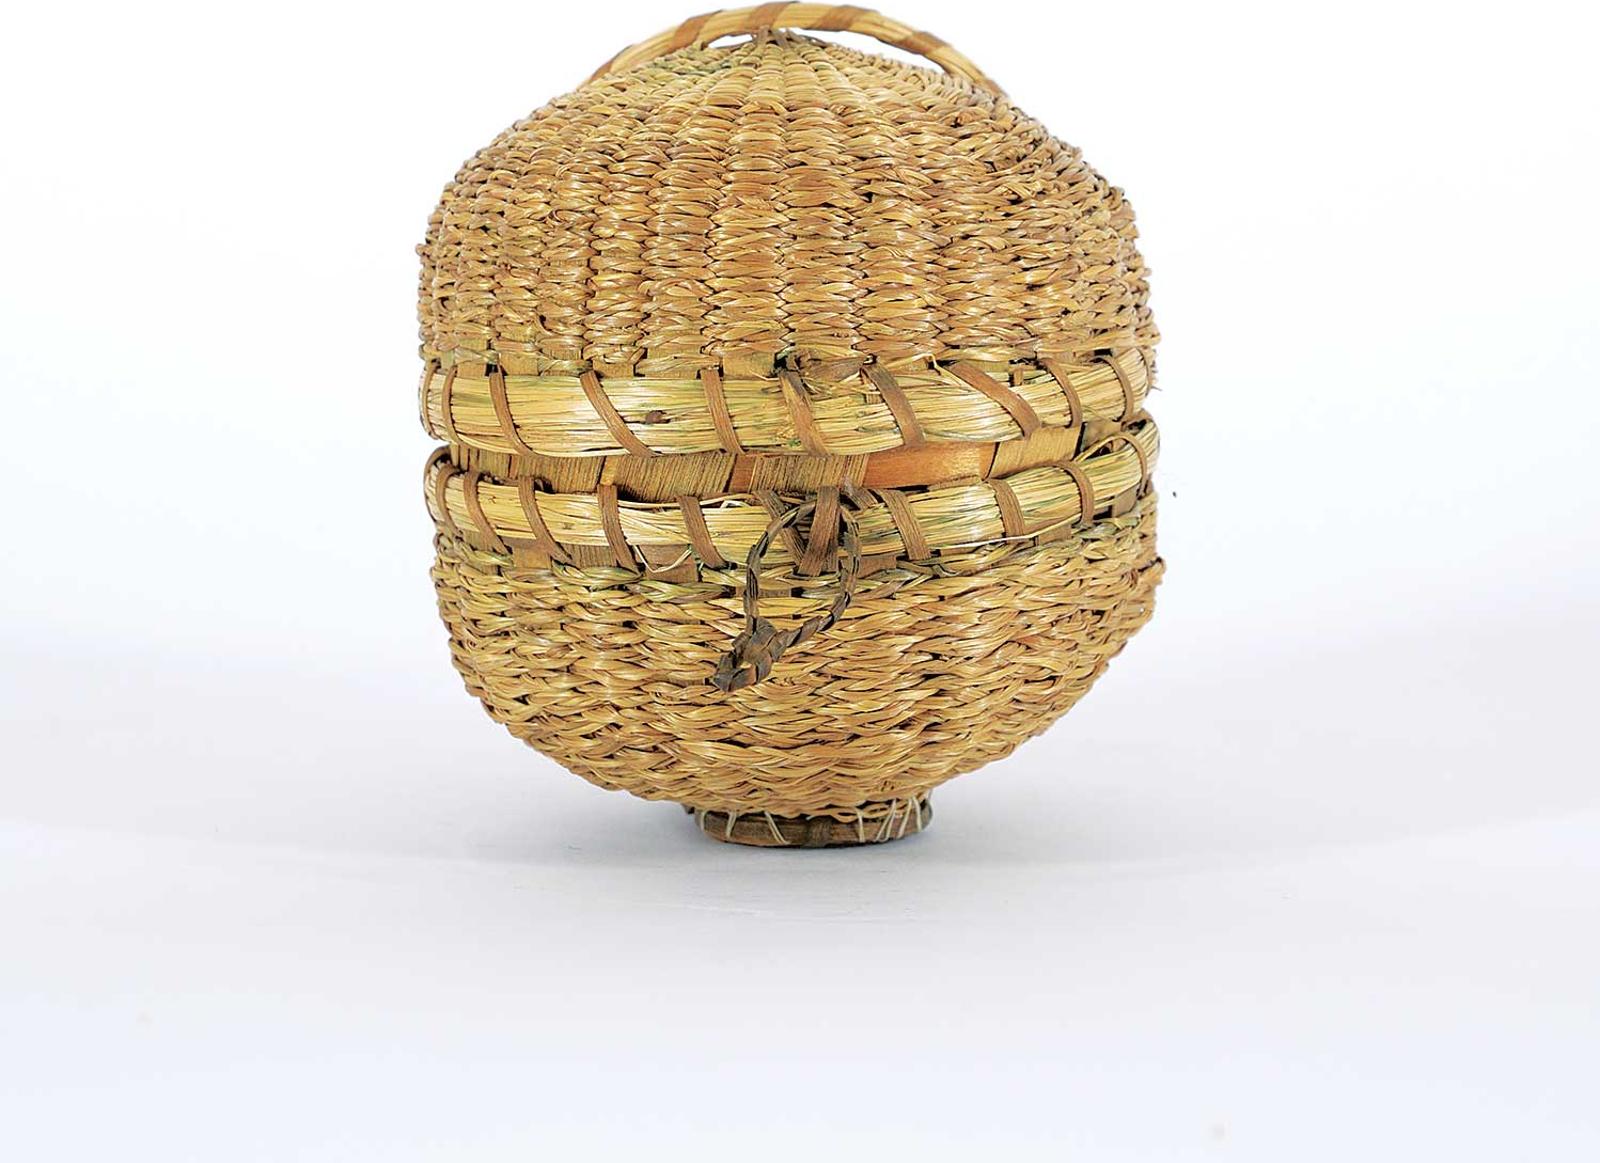 Northwest Coast First Nations School - A Globed Lidded Basket with Handle